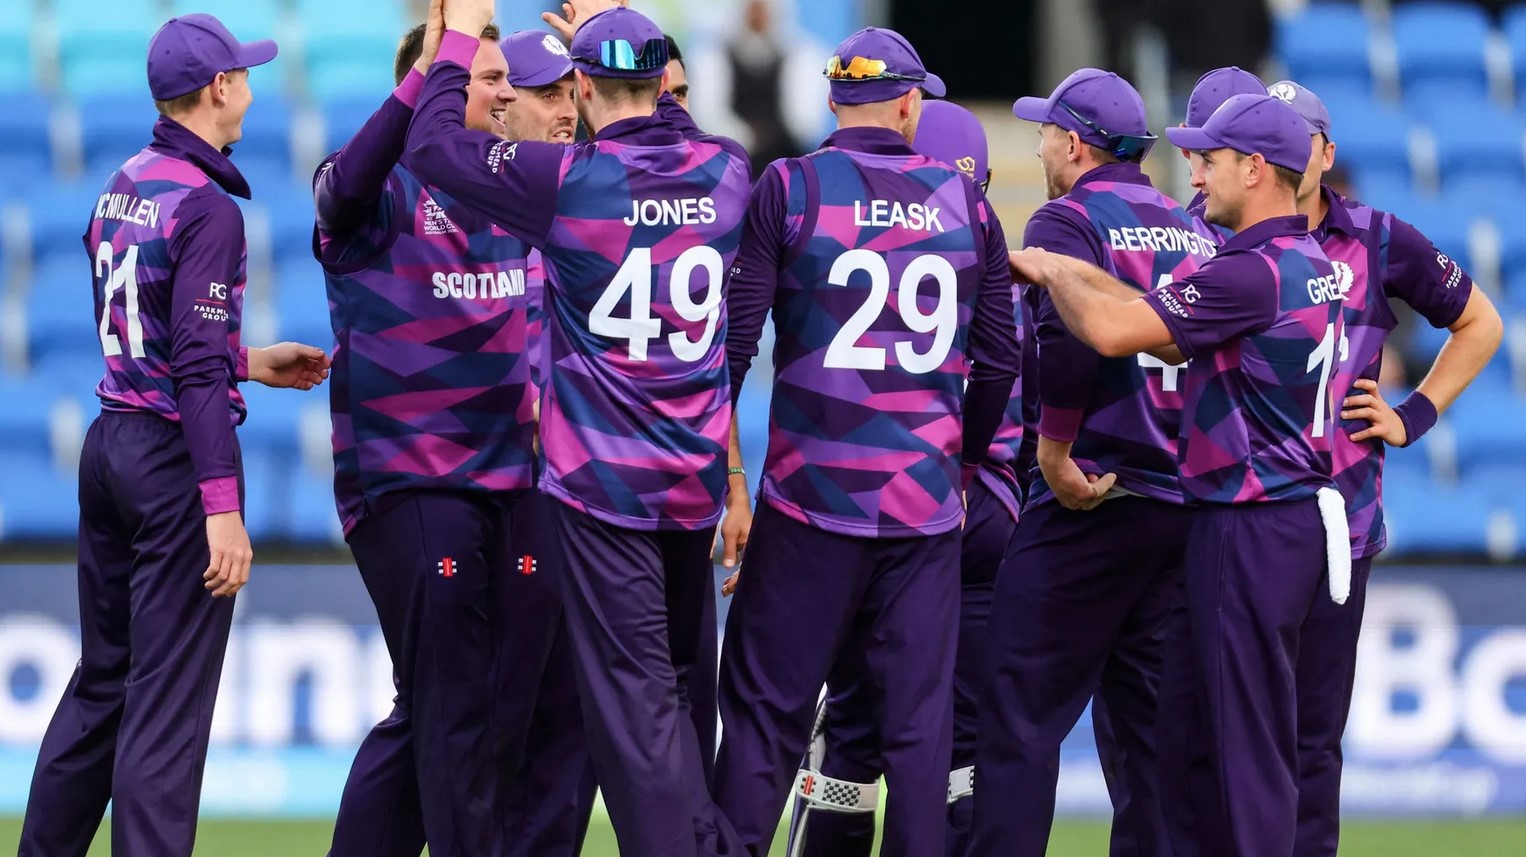 Scotland: 2023 Cricket World Cup Qualifier Preview - Emerging Cricket